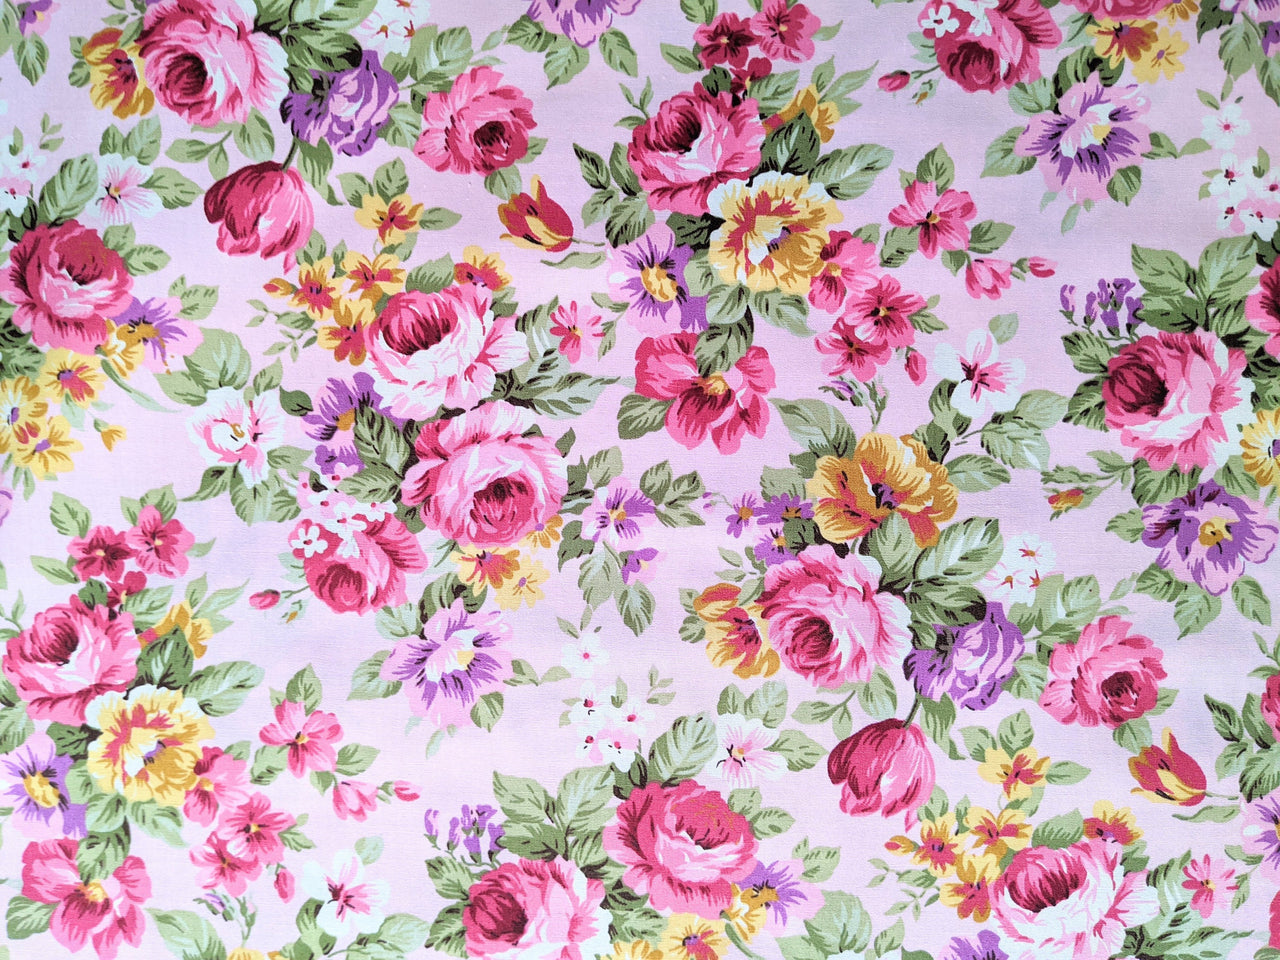 Pink 100 % Cotton Rose Floral Fabric, Floral Print Fabric, Roses Flower Fabric